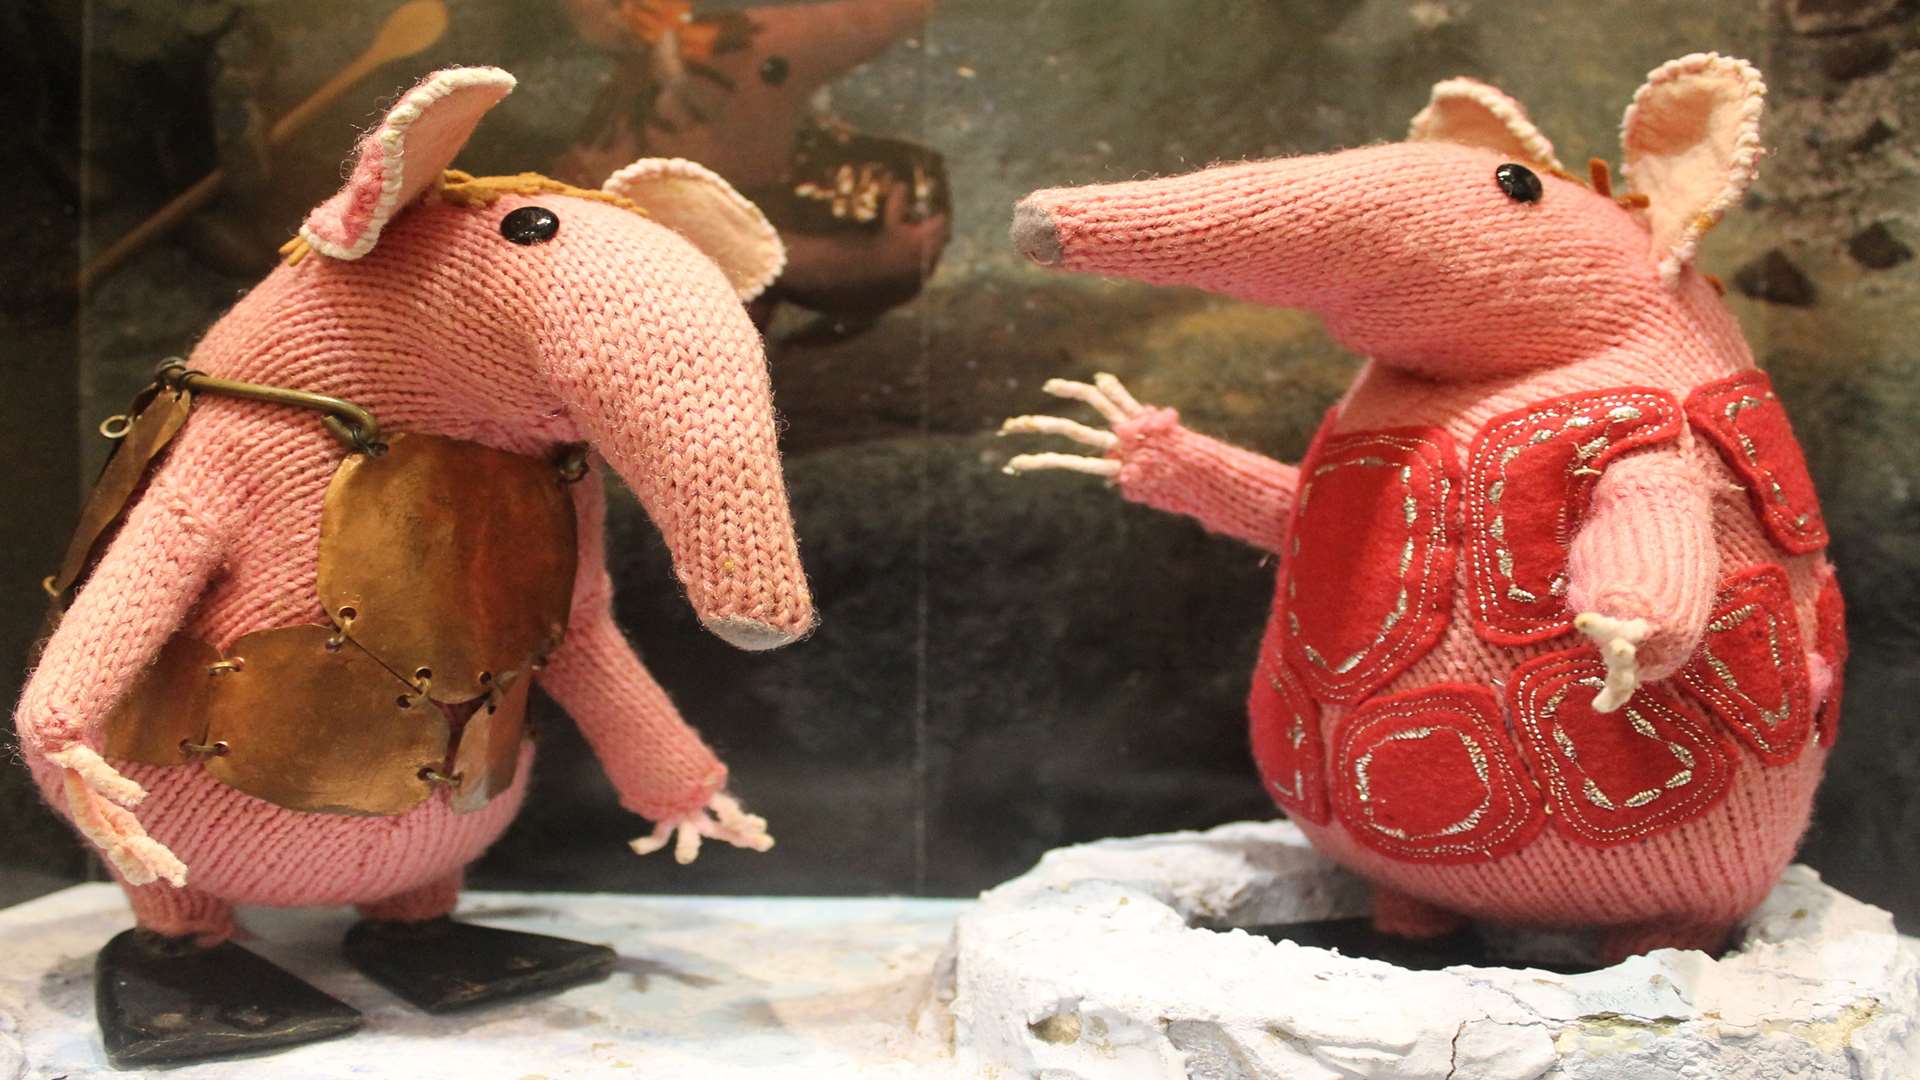 The original Clangers series was filmed near Canterbury and first broadcast in 1969